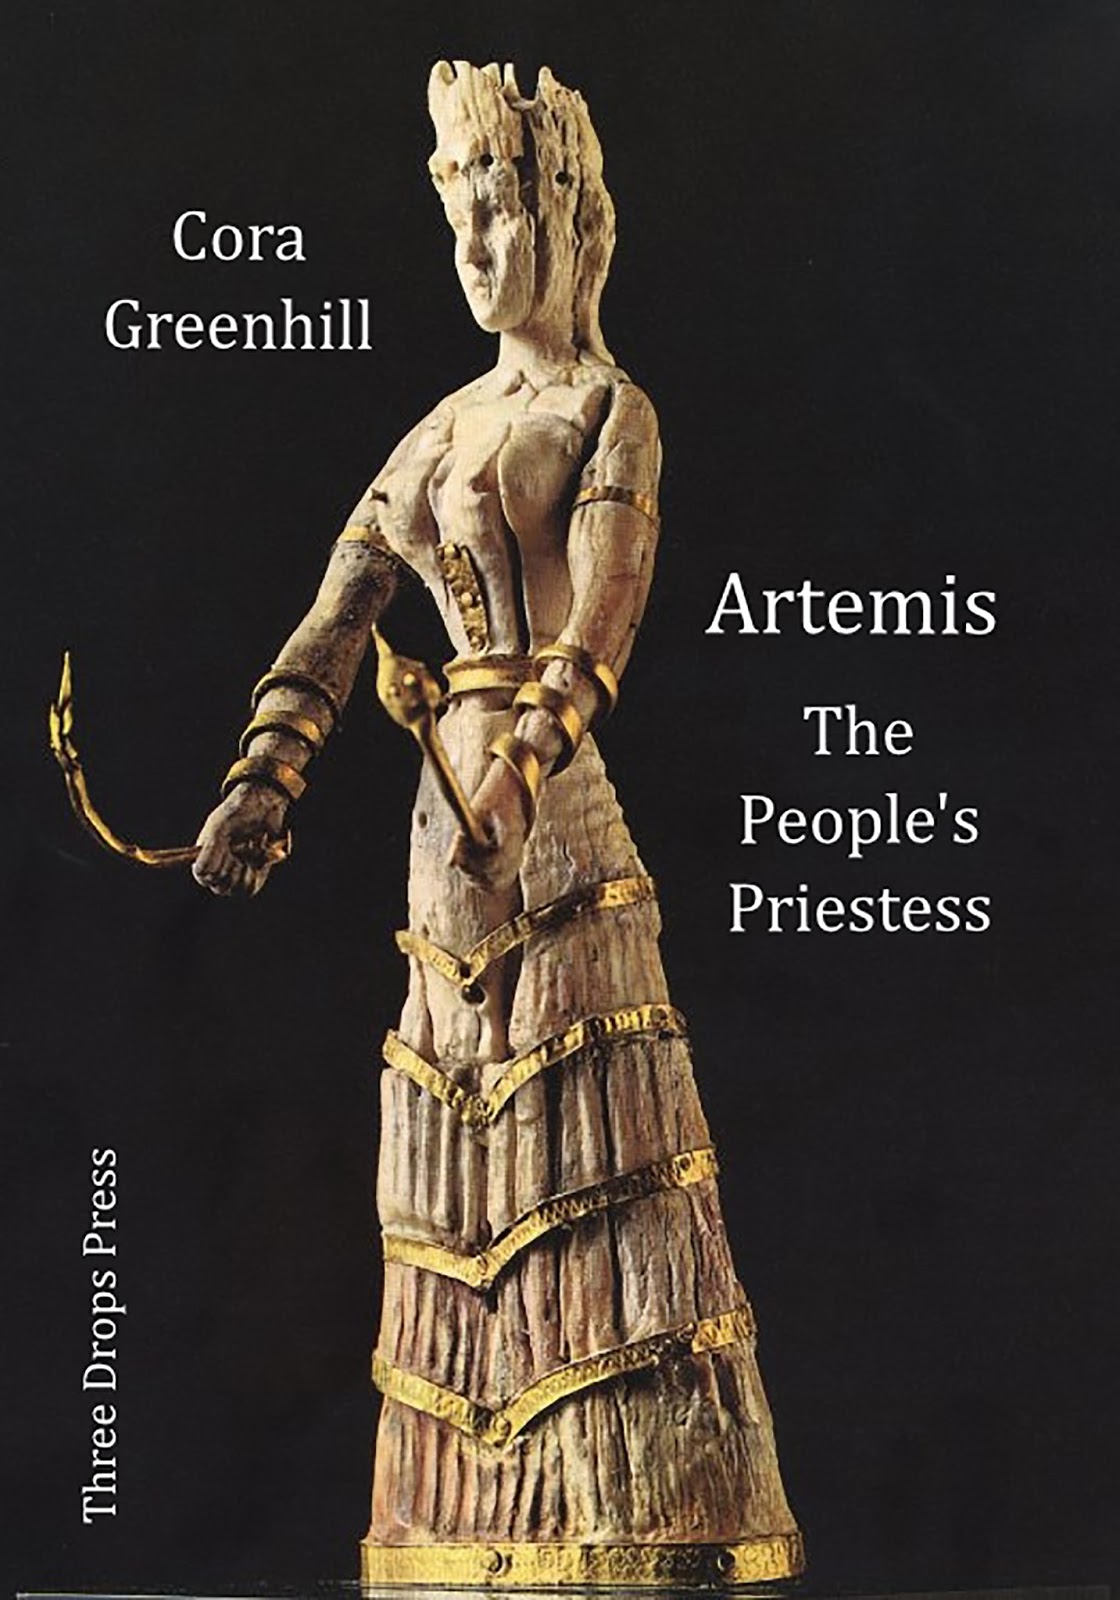 The Poetry Pile Artemis Has Arrived